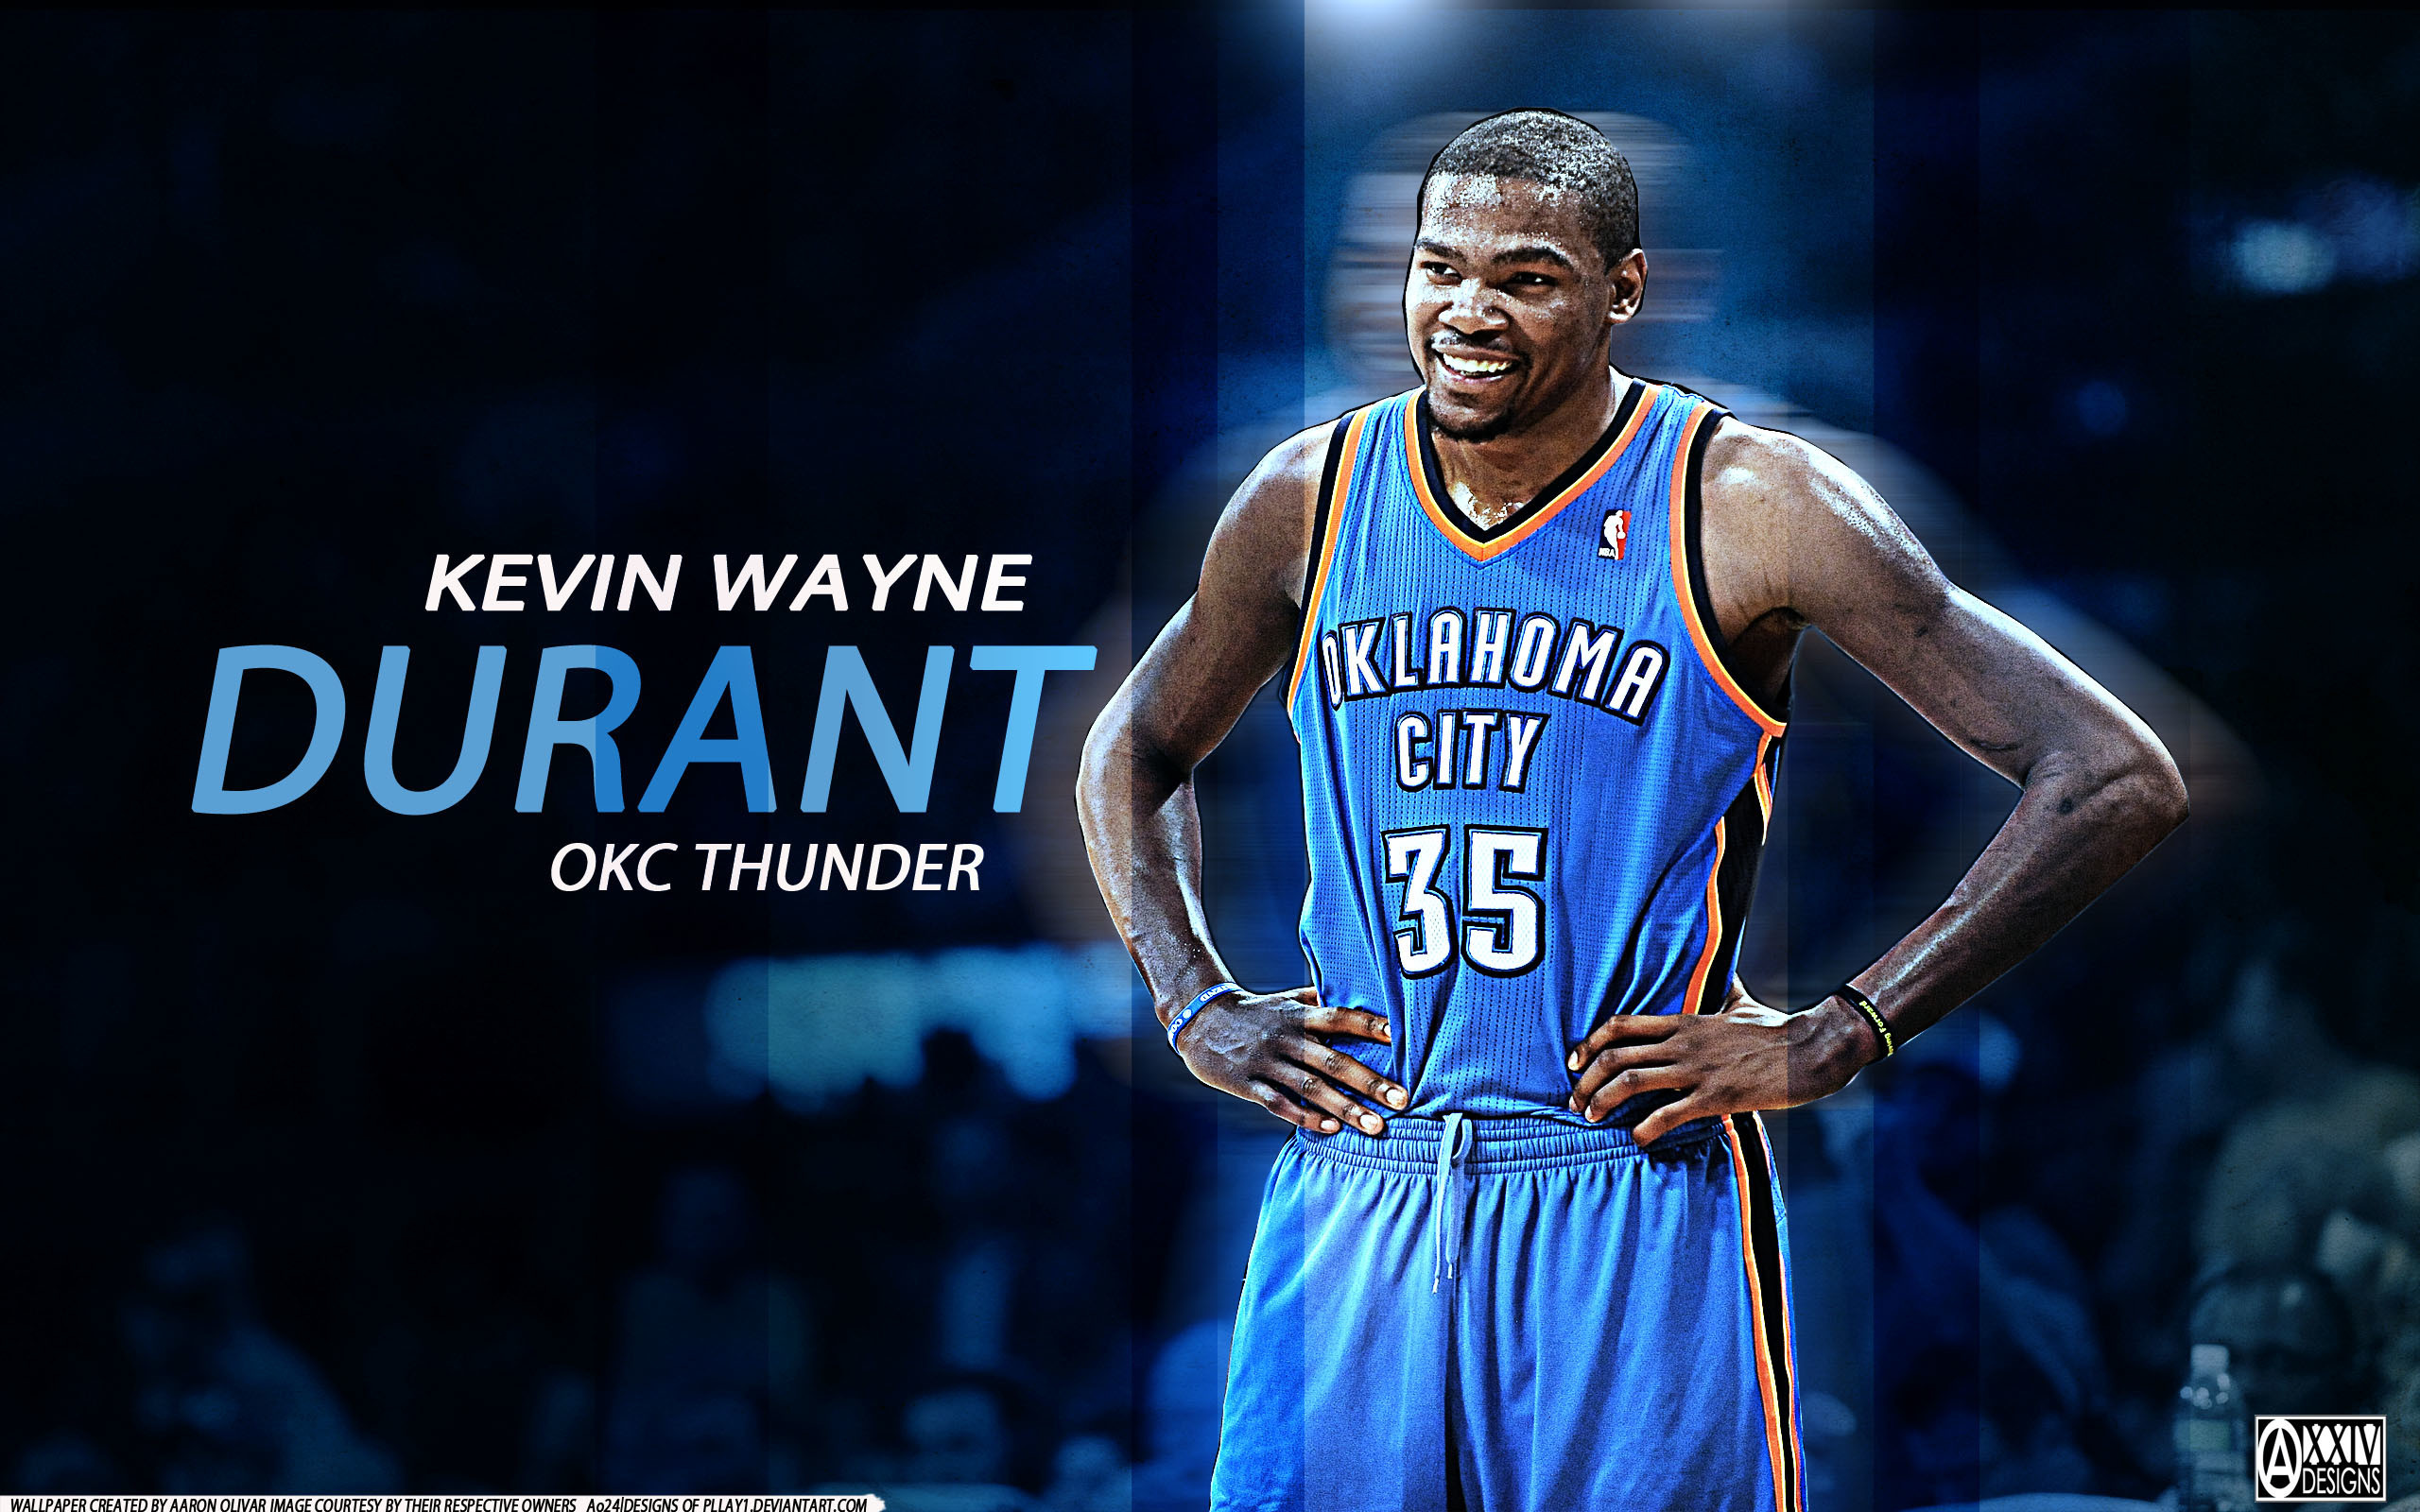 Kevin Durant Seattle Supersonics Wallpaper by lisong24kobe on